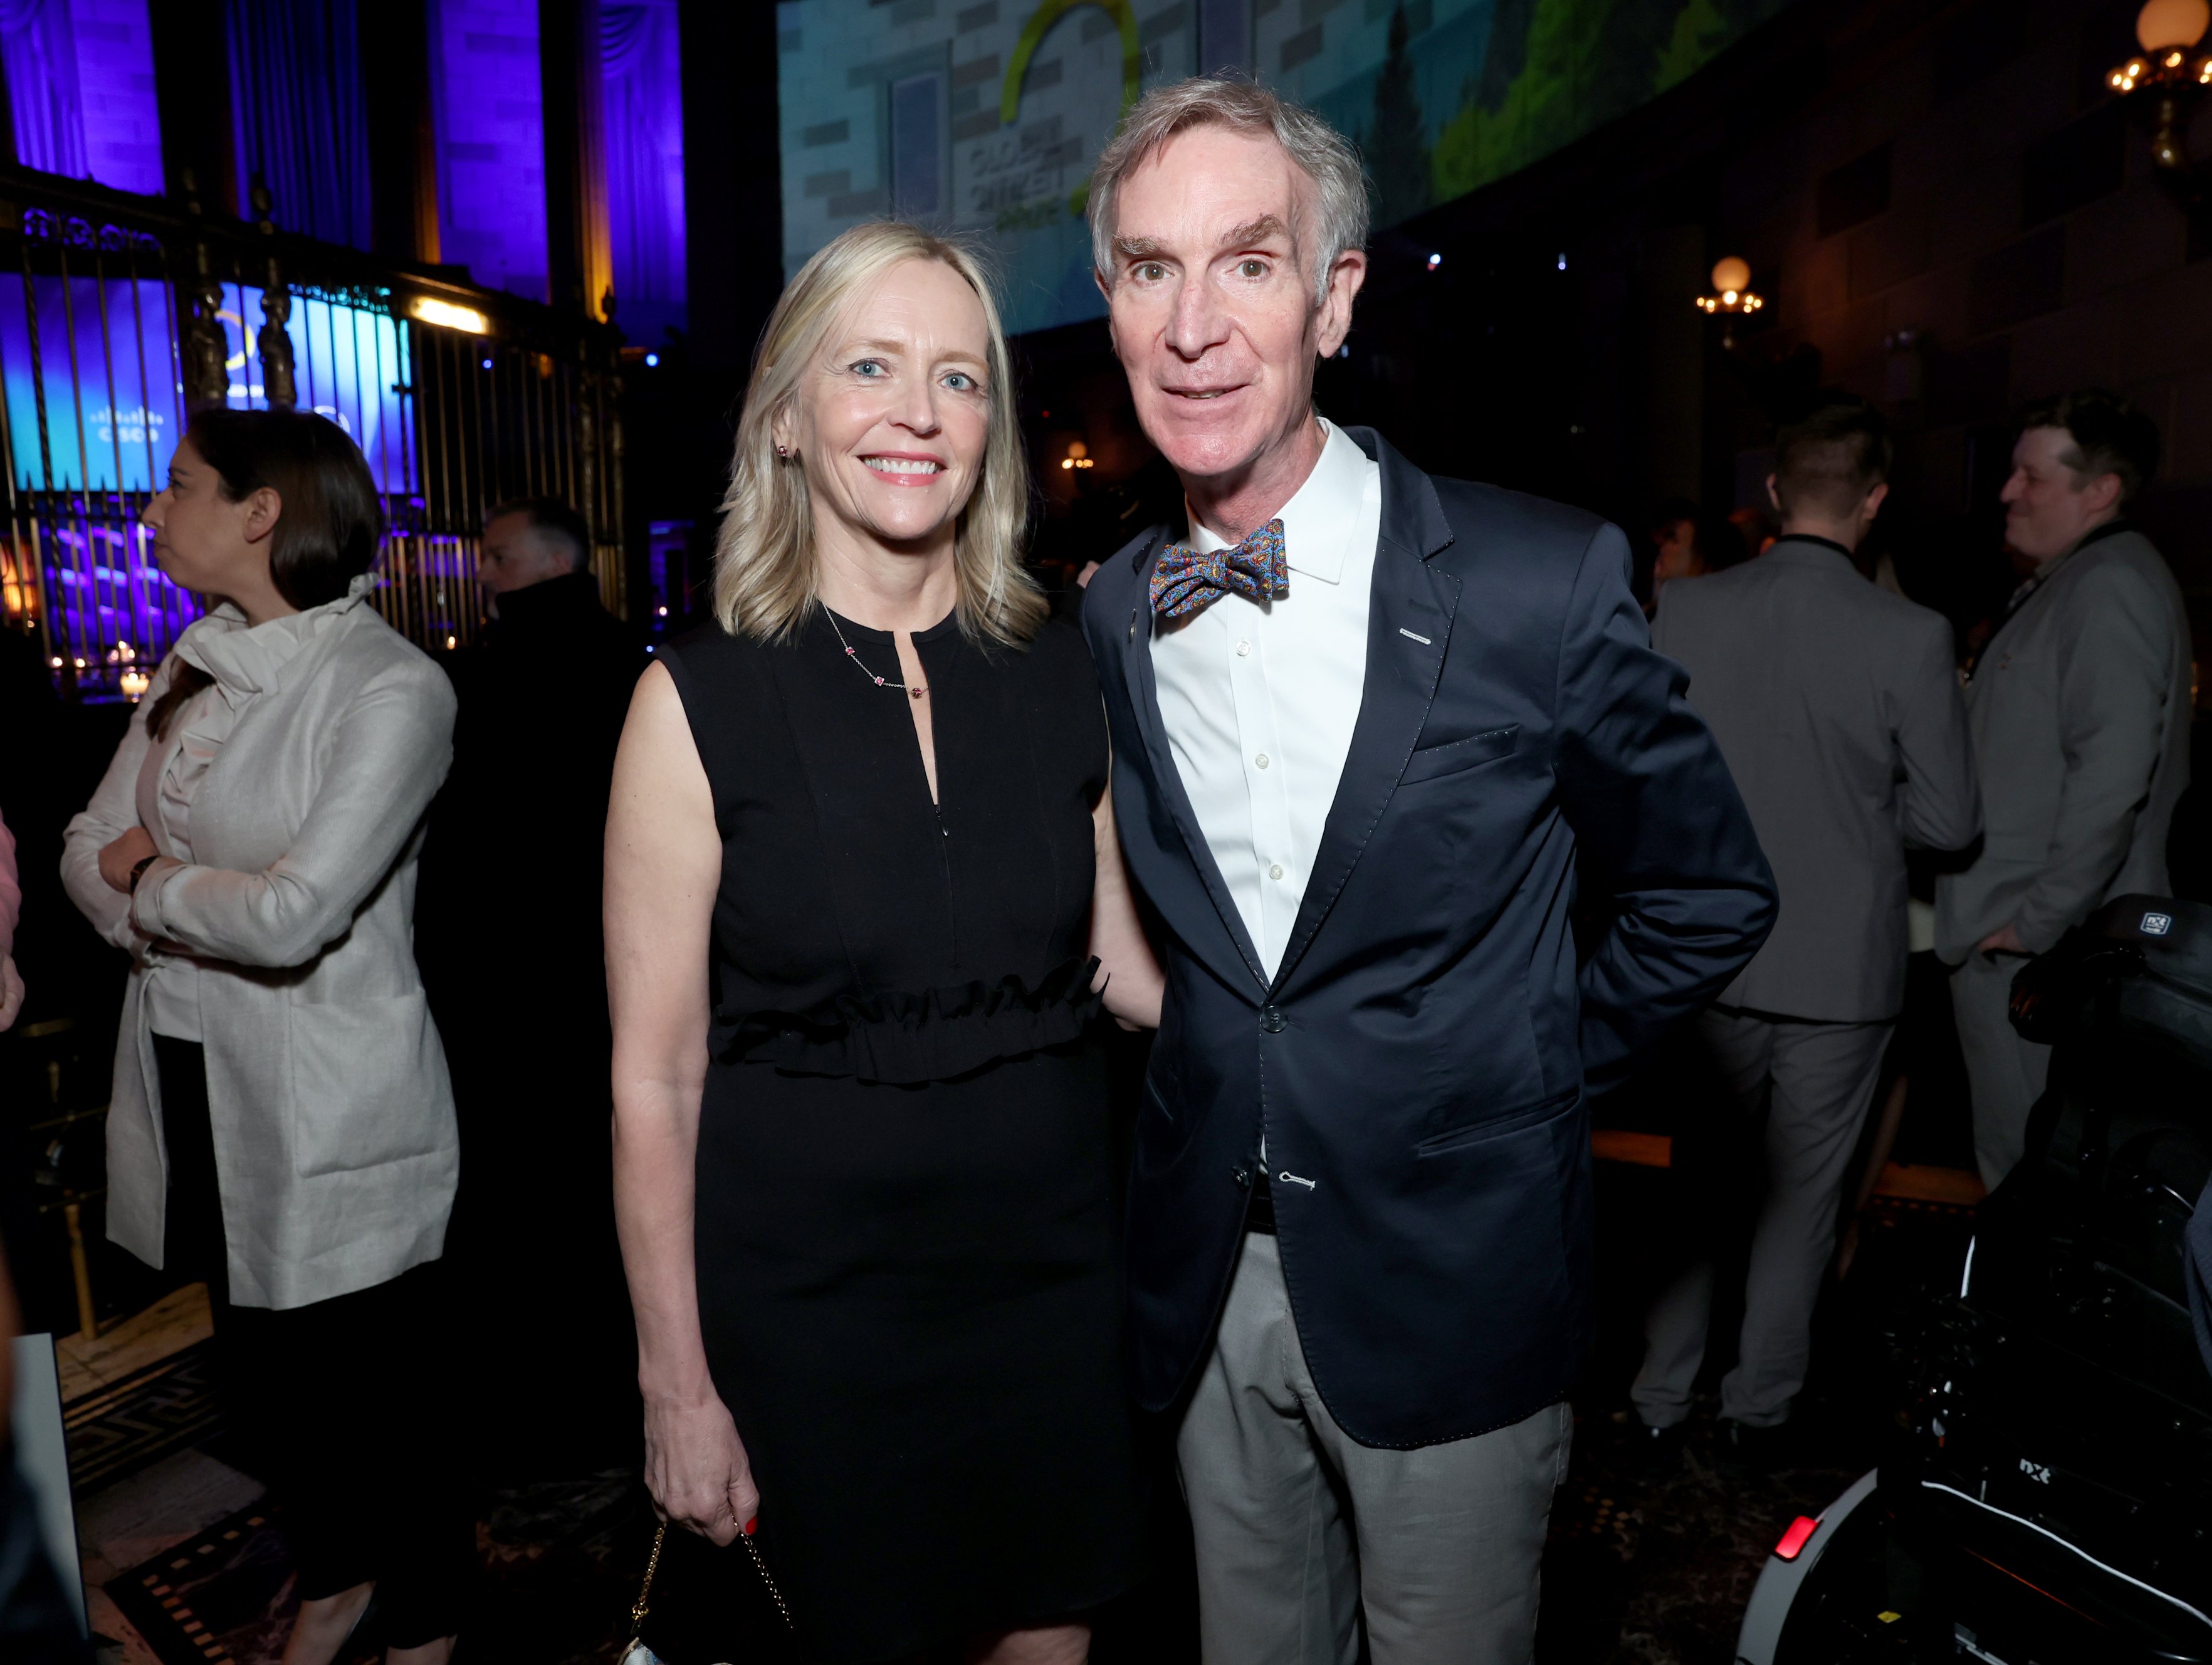 Liza Mundy and Bill Nye at the Global Citizen Prize event on May 22, 2022 in New York City.  |  Source: Getty Images 